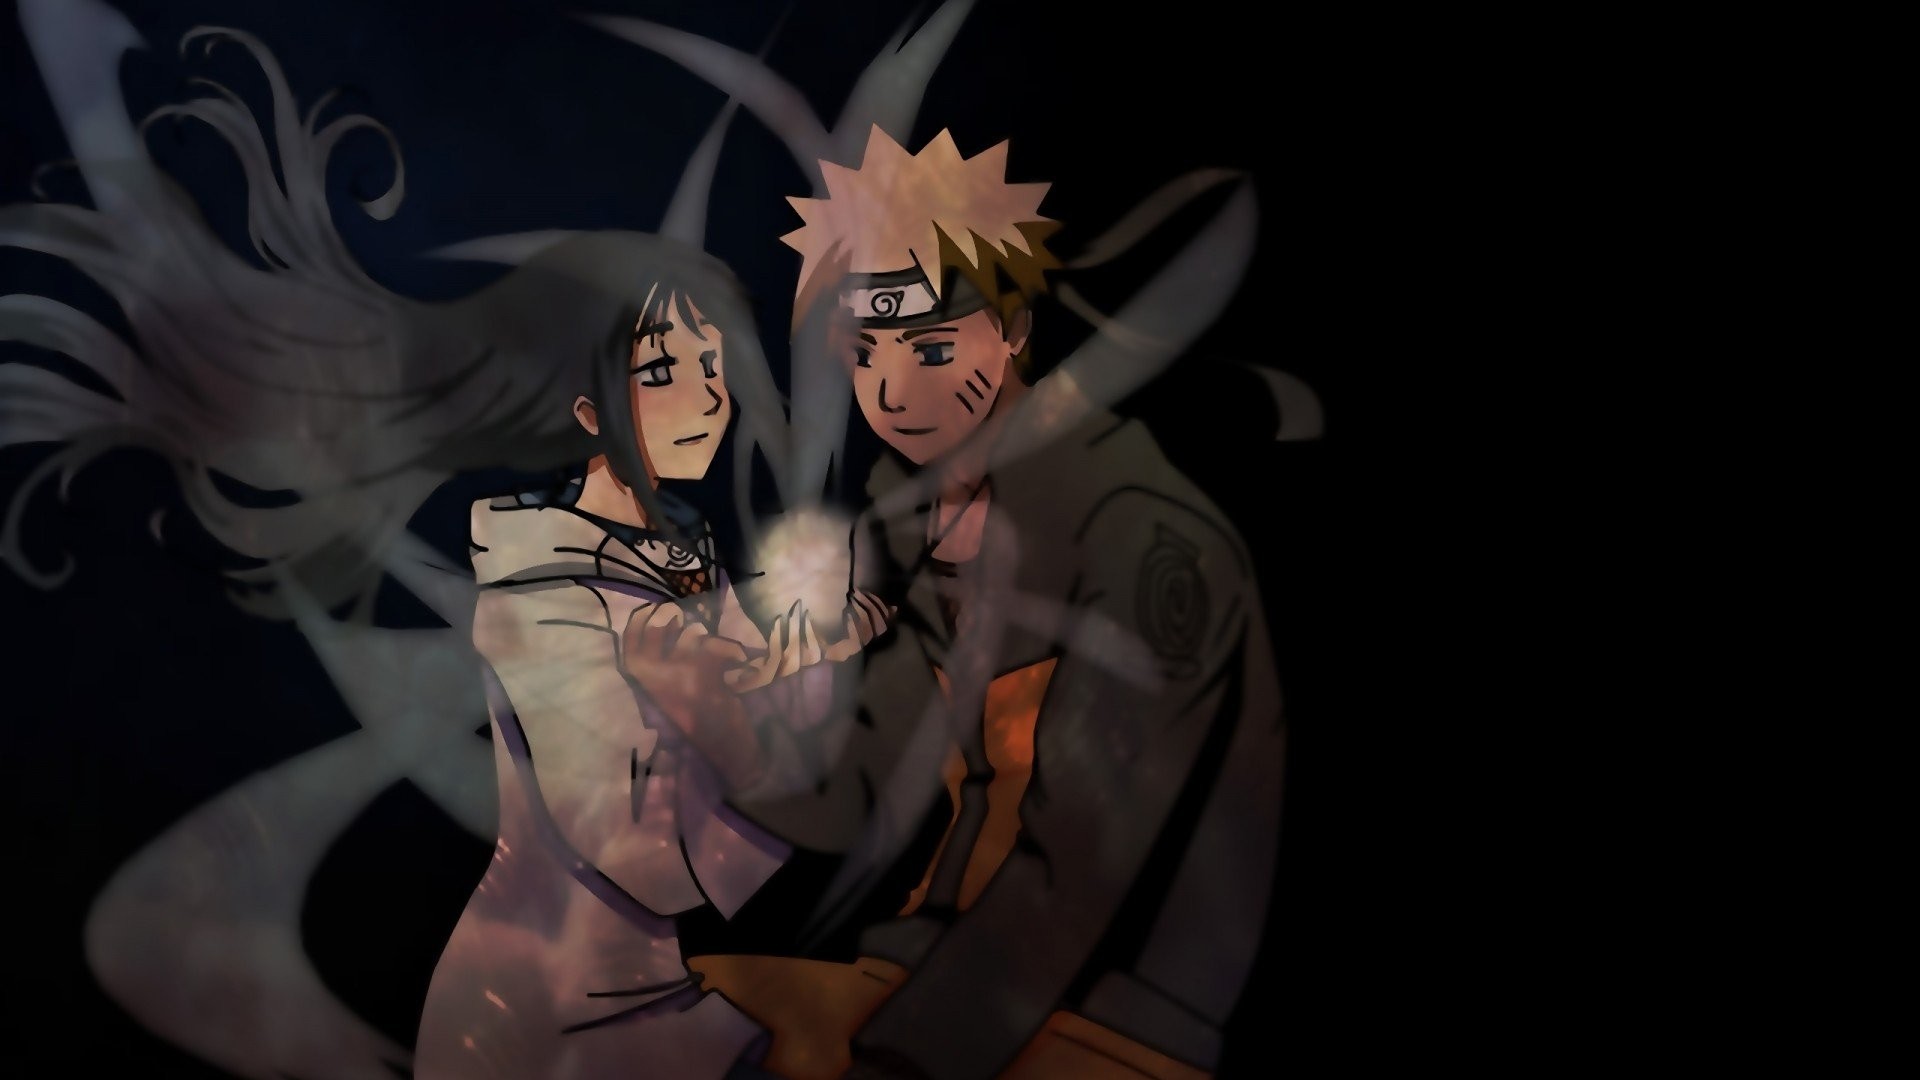 1920x1080 Wallpaper Hd Naruto Collection For Free Download | HD Wallpapers |  Pinterest | Naruto wallpaper and Wallpaper